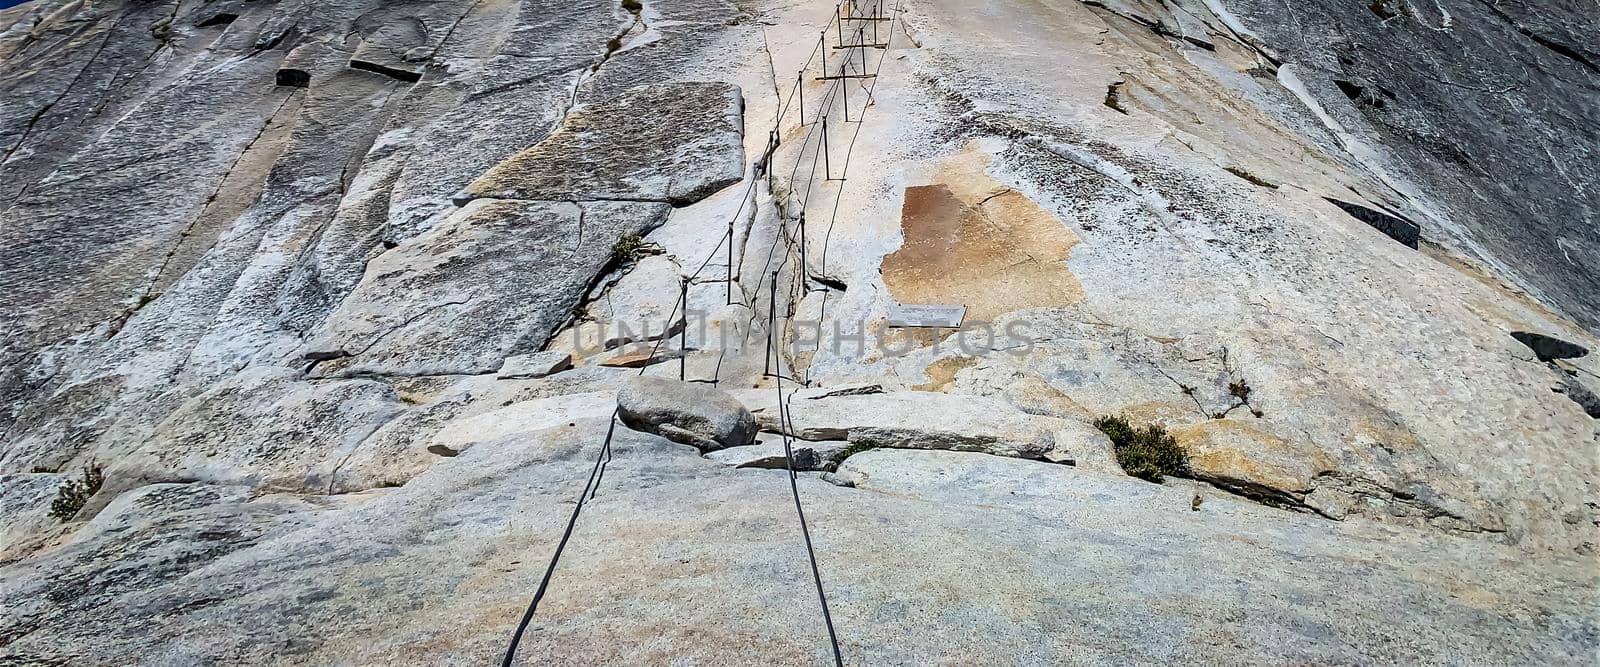 Half Dome cable in Yosemite National Park by gepeng